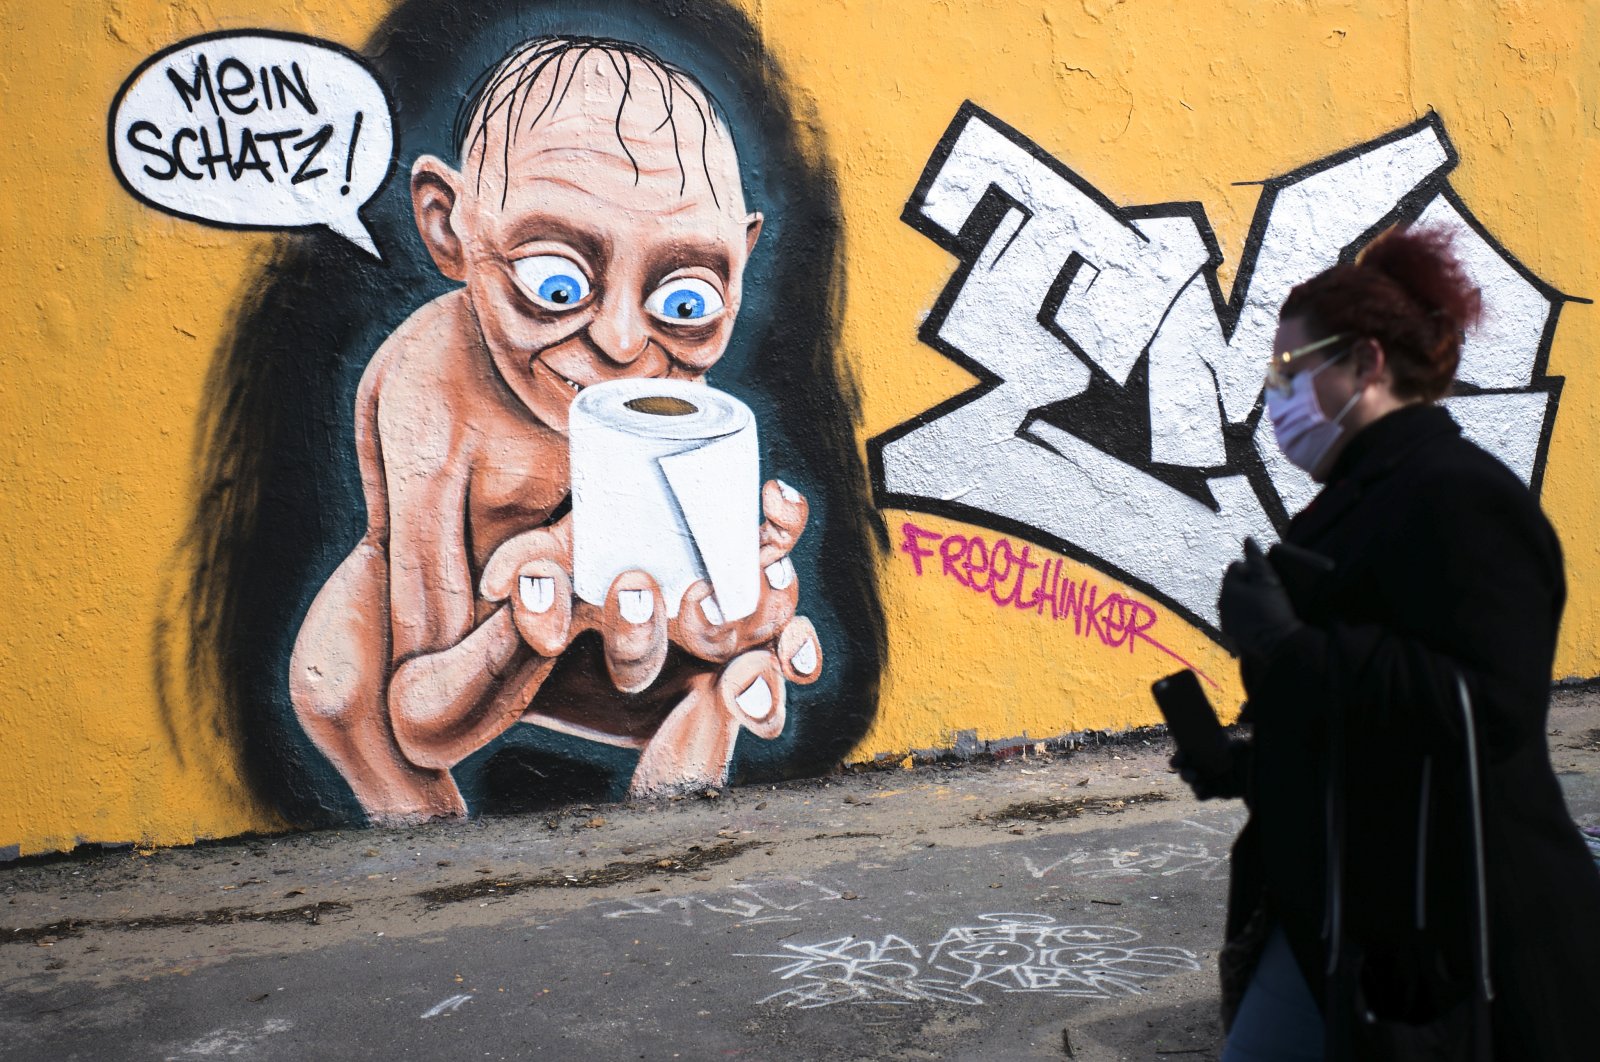 A woman walks in front of graffiti depicting the character of Gollum from "Lord of the Rings," holding a roll of toilet paper and saying "My precious," in the Mauerpark public park in the Prenzlauer Berg district of Berlin, Germany, Saturday, March 21, 2020. (AP Photo)